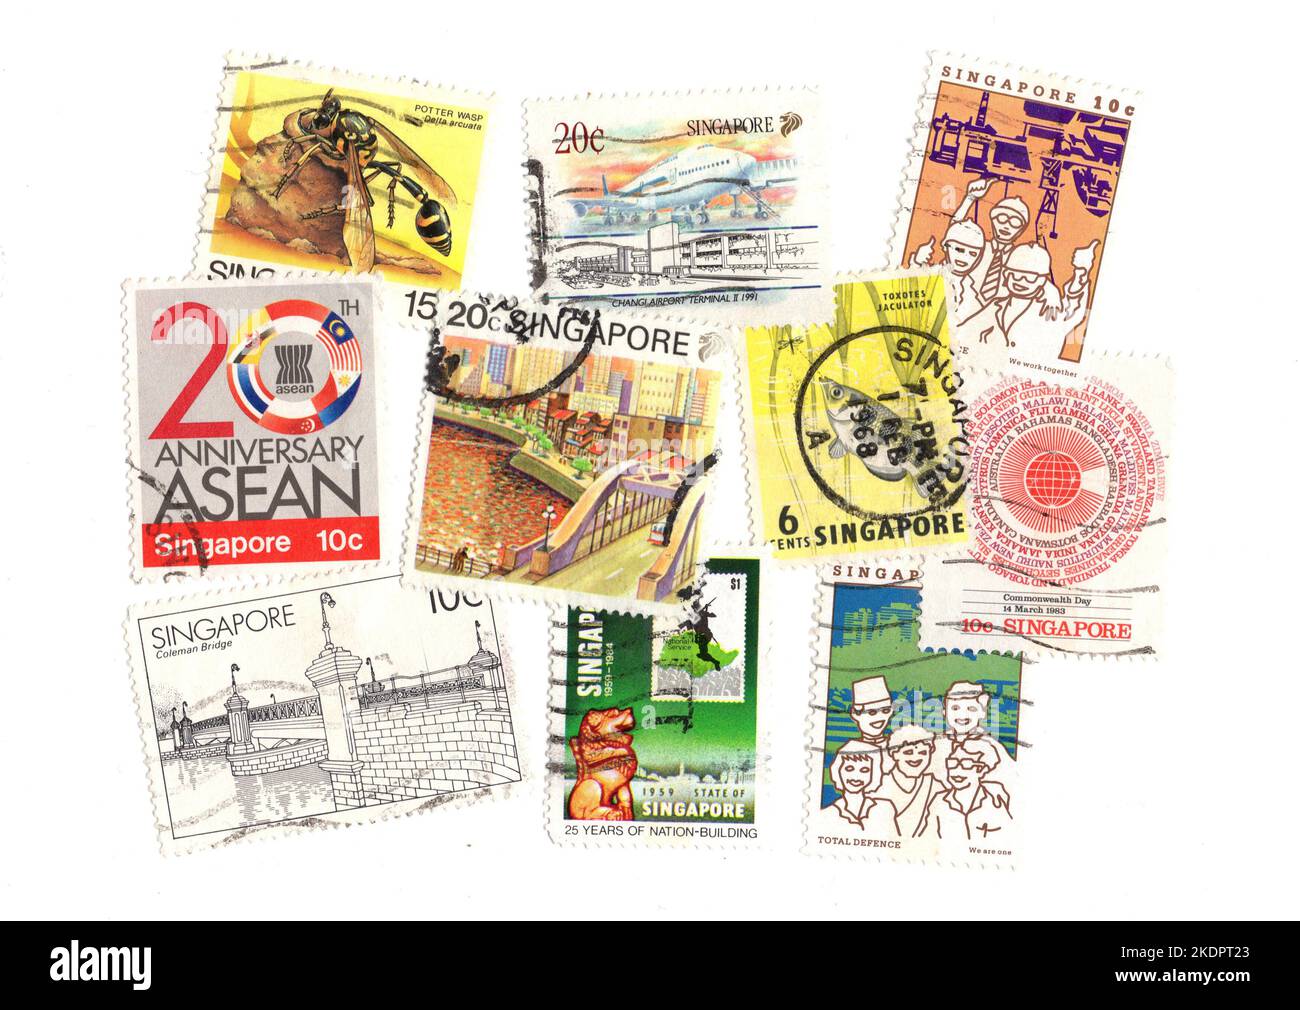 A montage of vintage postage stamps from Singapore on a white background. Stock Photo